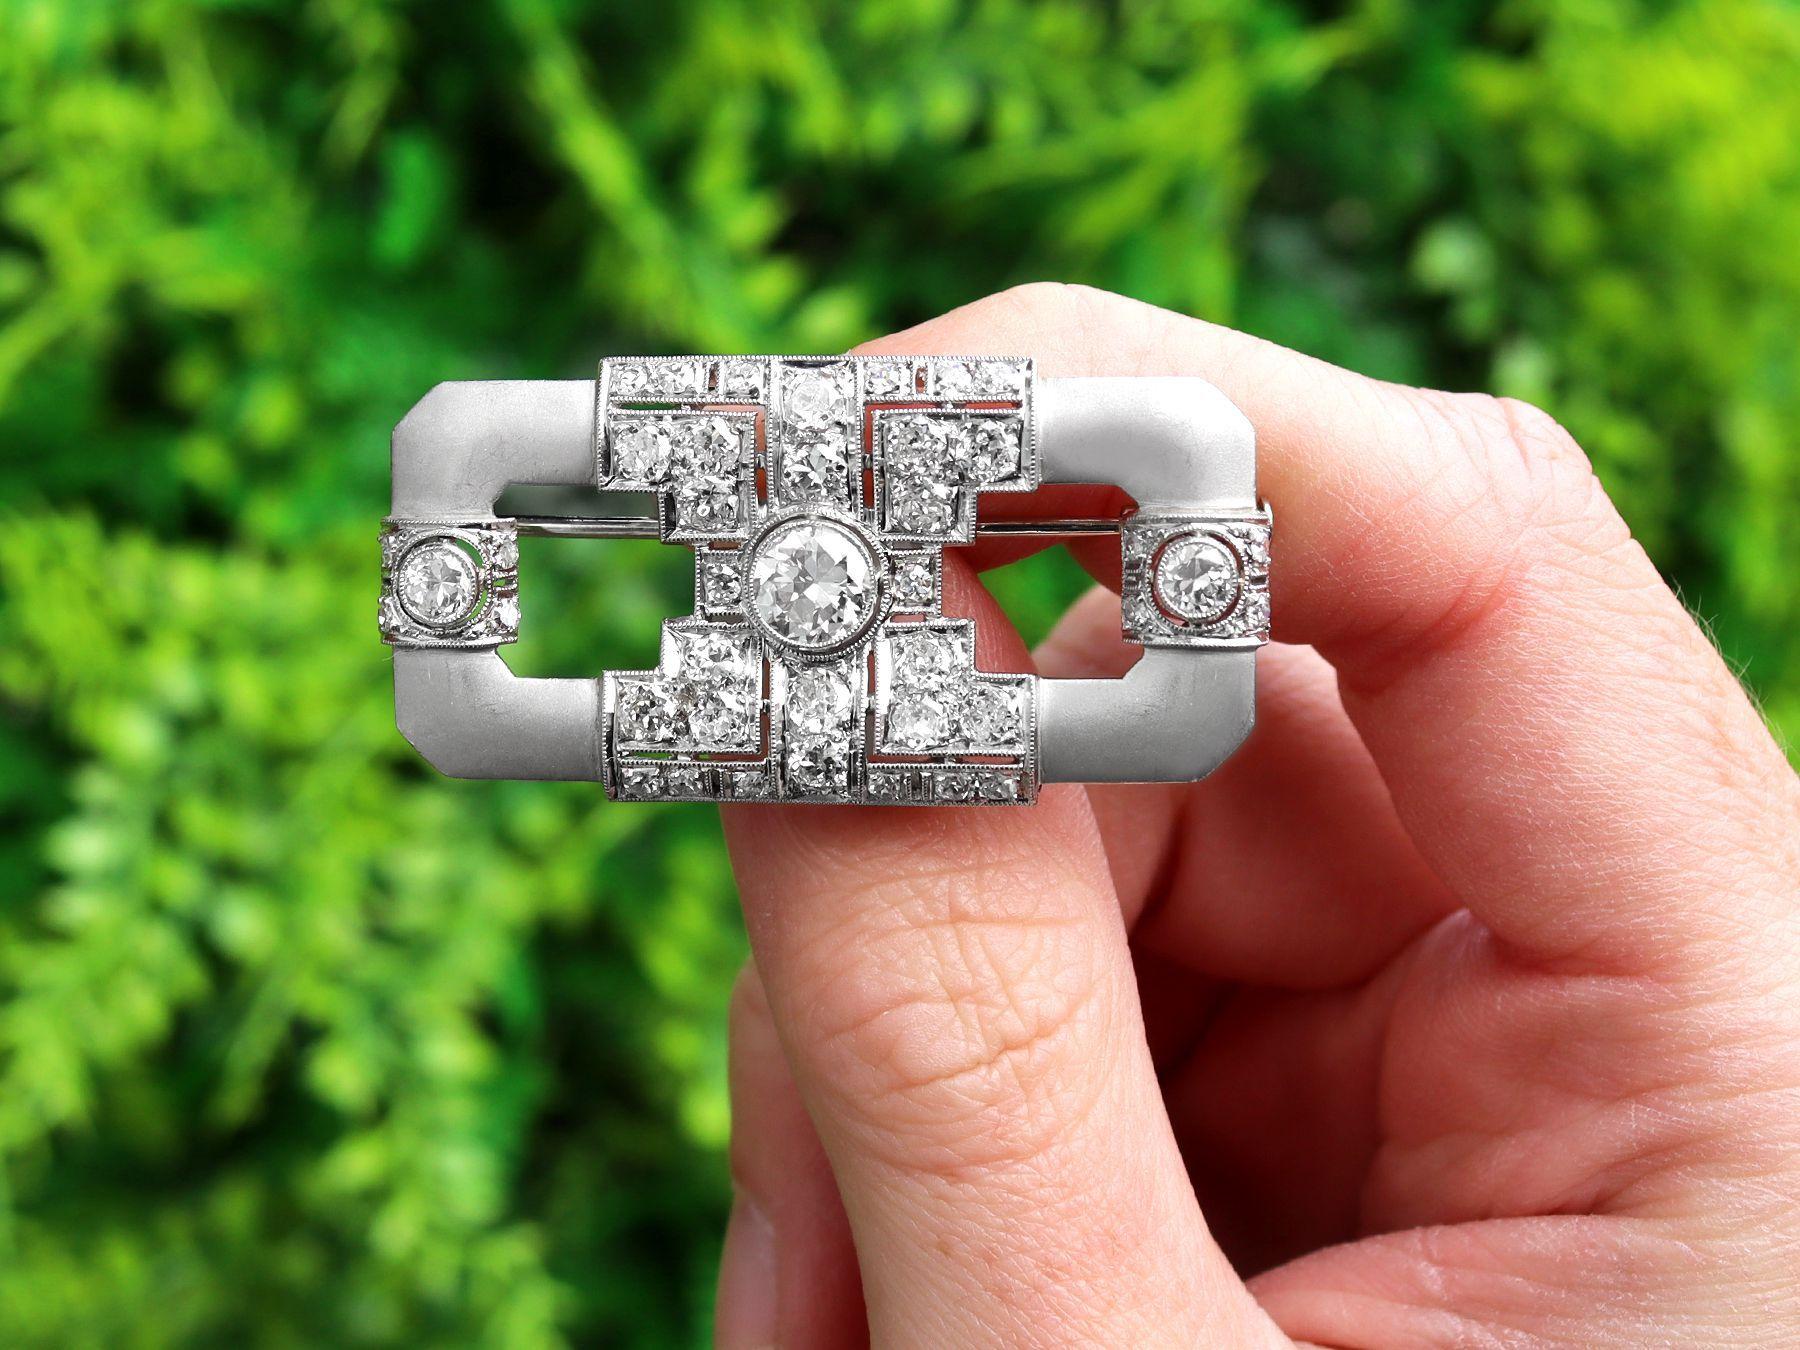 A stunning, fine and impressive antique 3.50 carat diamond and platinum Art Deco brooch; part of our diverse jewellery and estate jewelry collections

This stunning, fine and impressive antique brooch has been crafted in platinum.

The broad